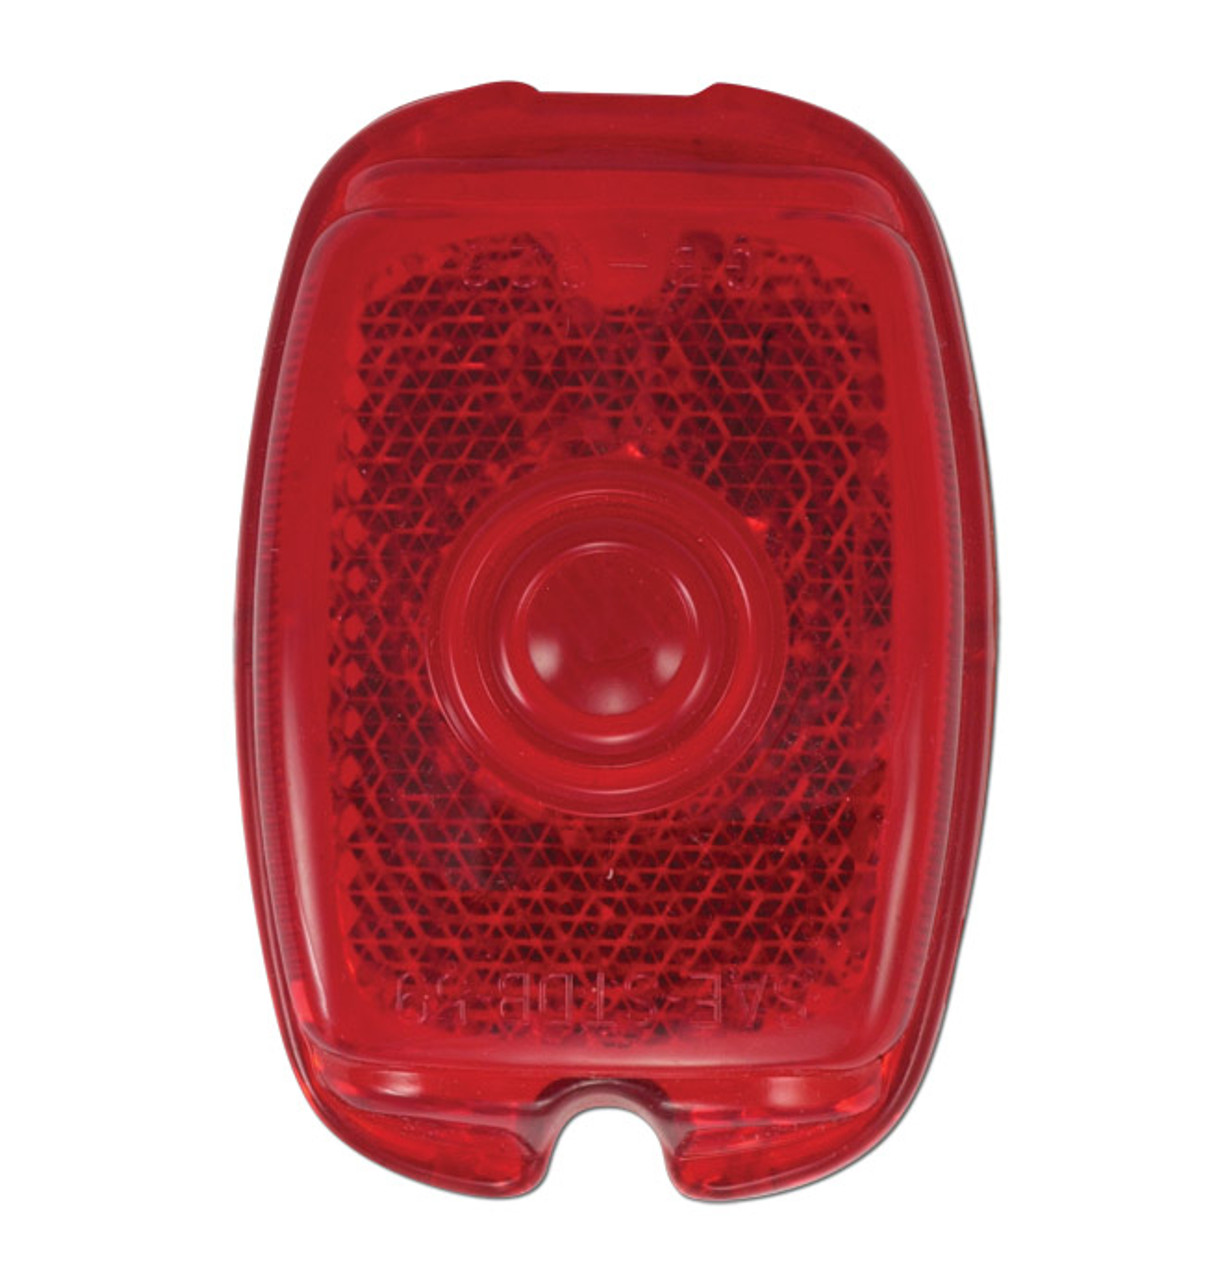 1940-1953 Chevy/GMC Truck Tail Light Lens L/R or R/H, Red, Plastic